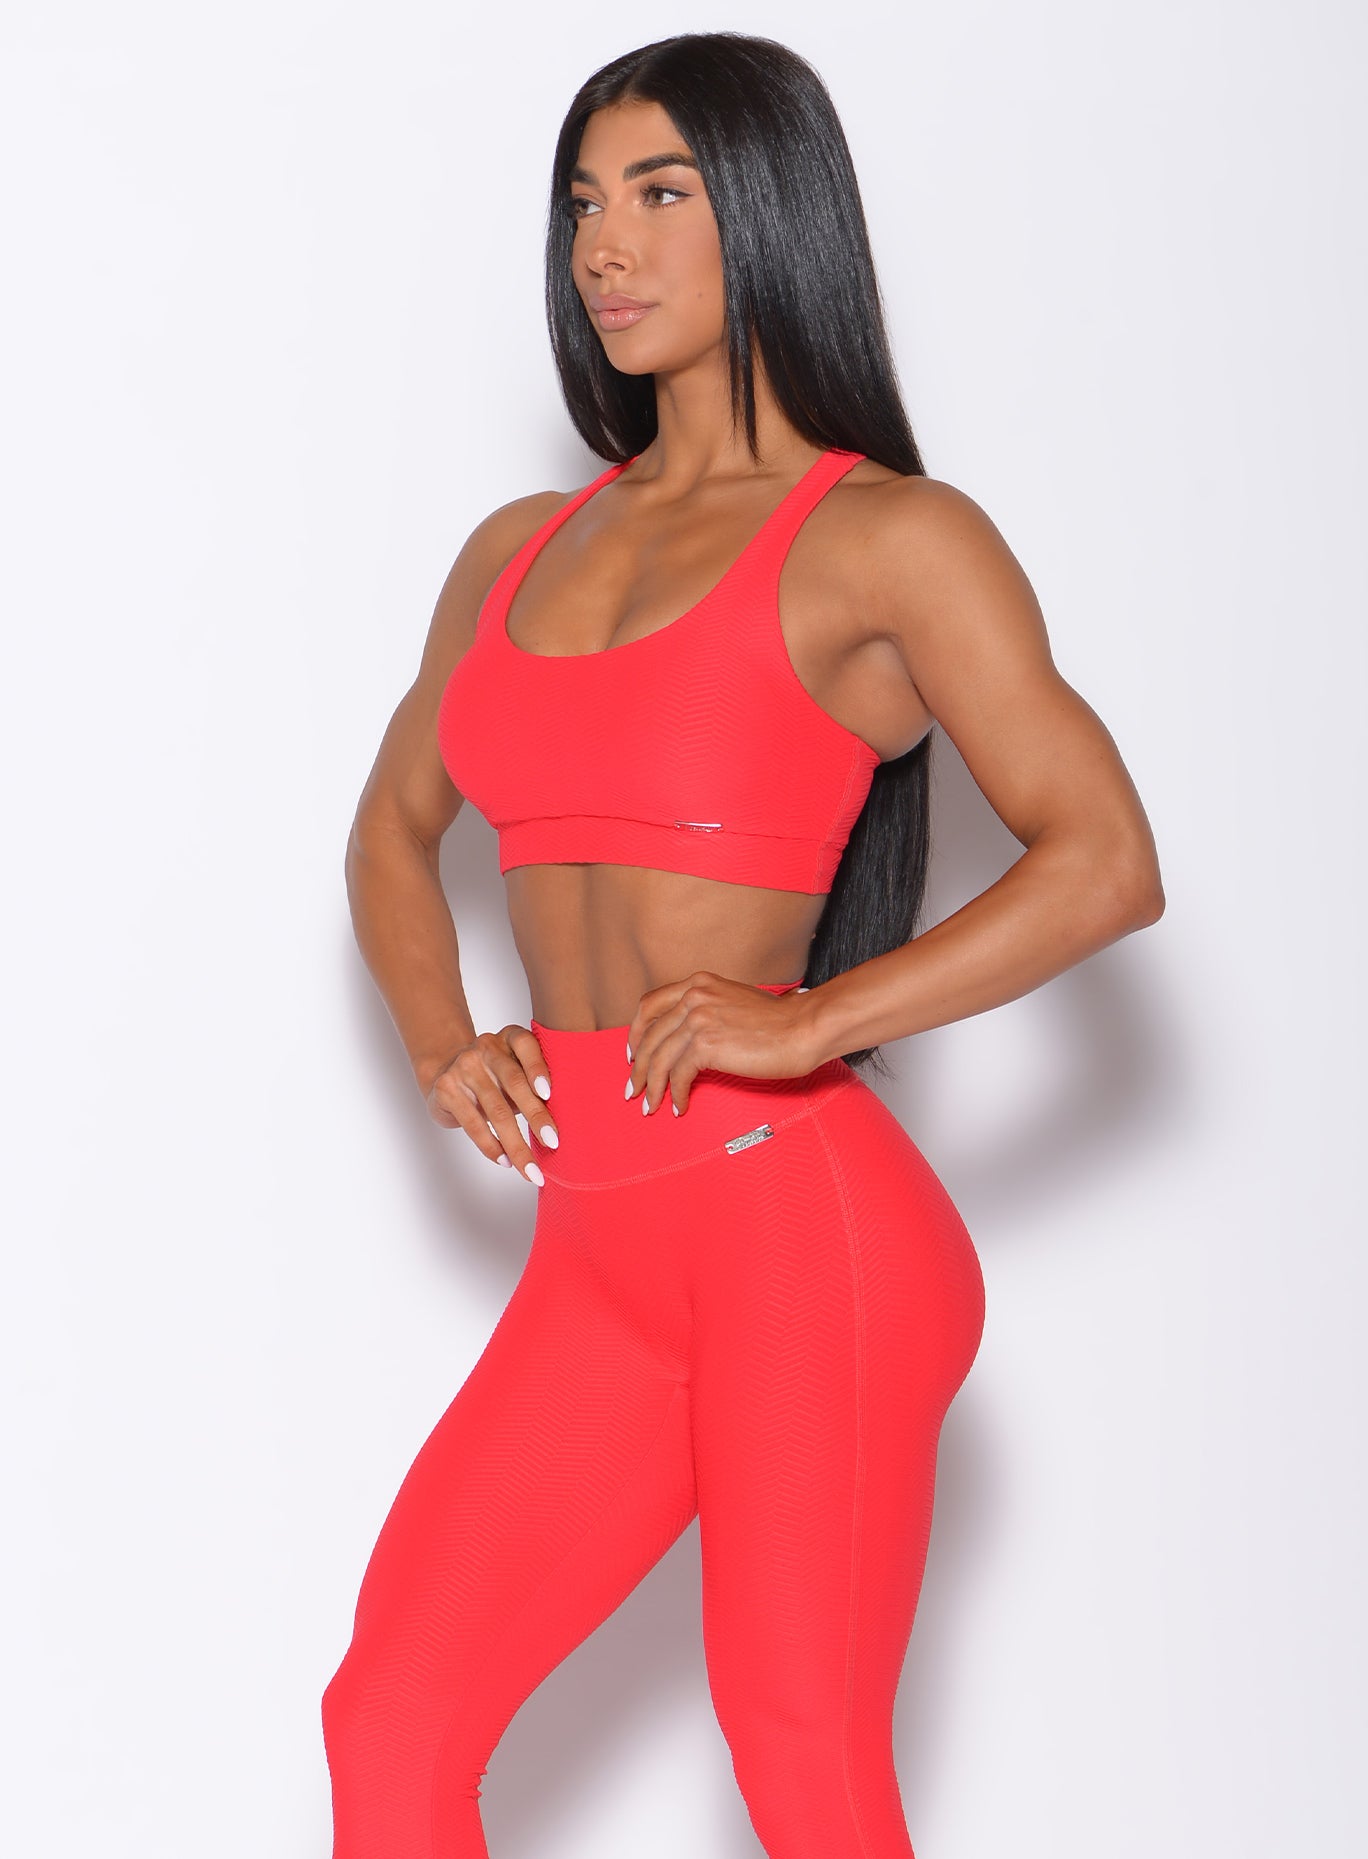 Left side profile view of a model angled left wearing our chevron sports bra in flame red color and a matching leggings